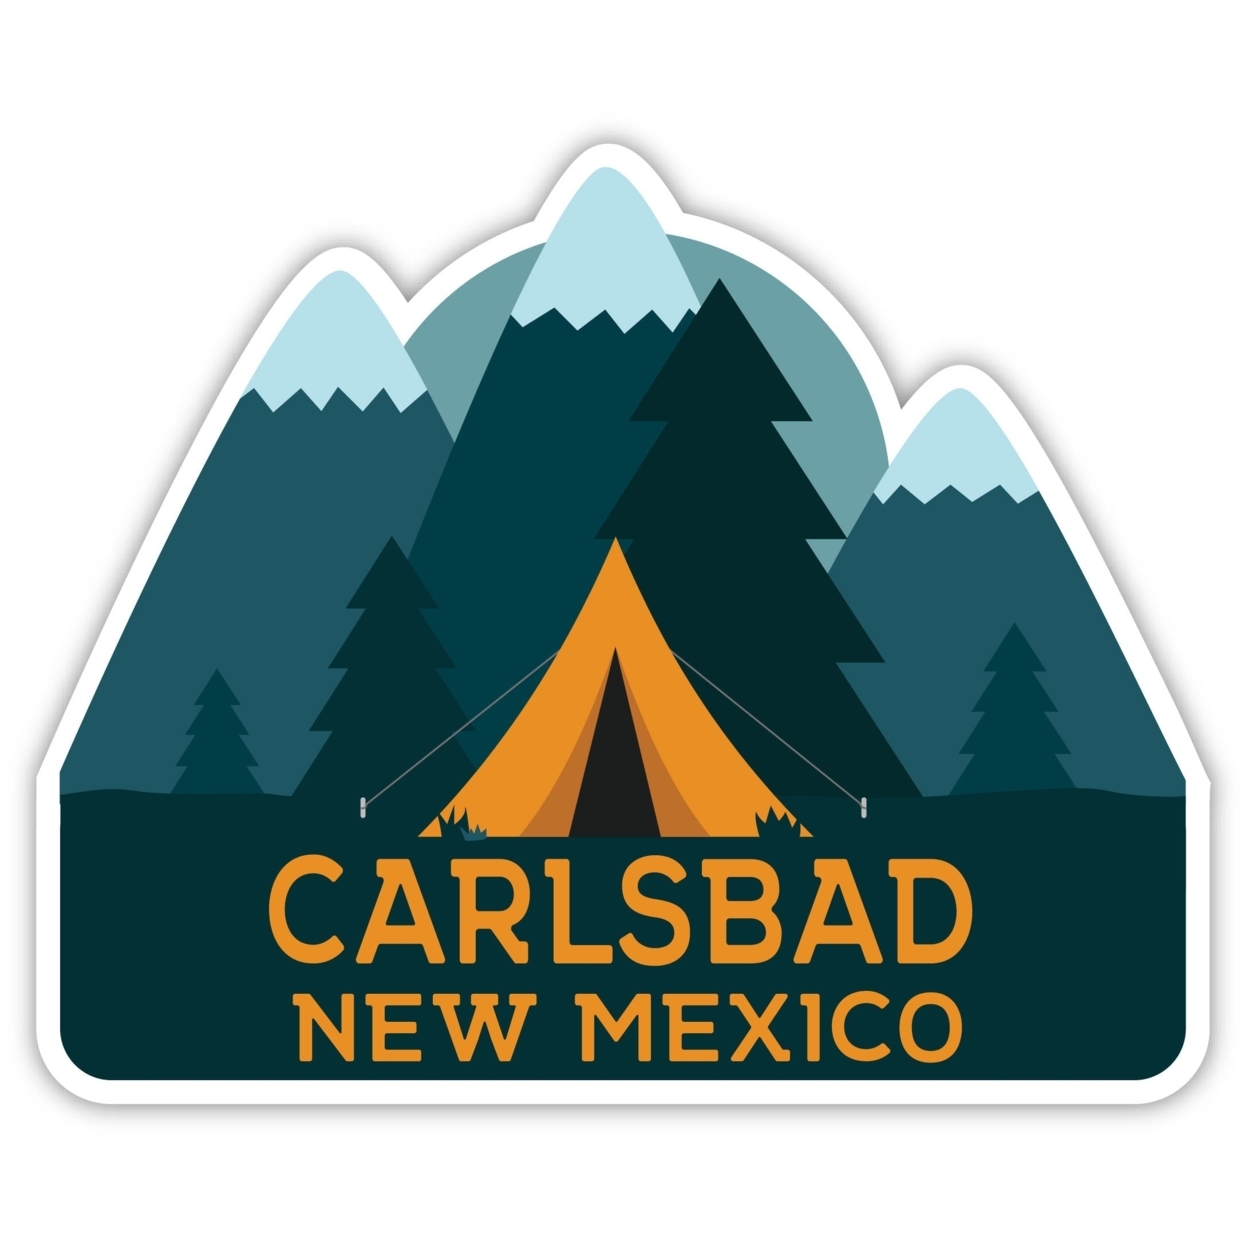 Carlsbad New Mexico Souvenir Decorative Stickers (Choose Theme And Size) - Single Unit, 4-Inch, Tent